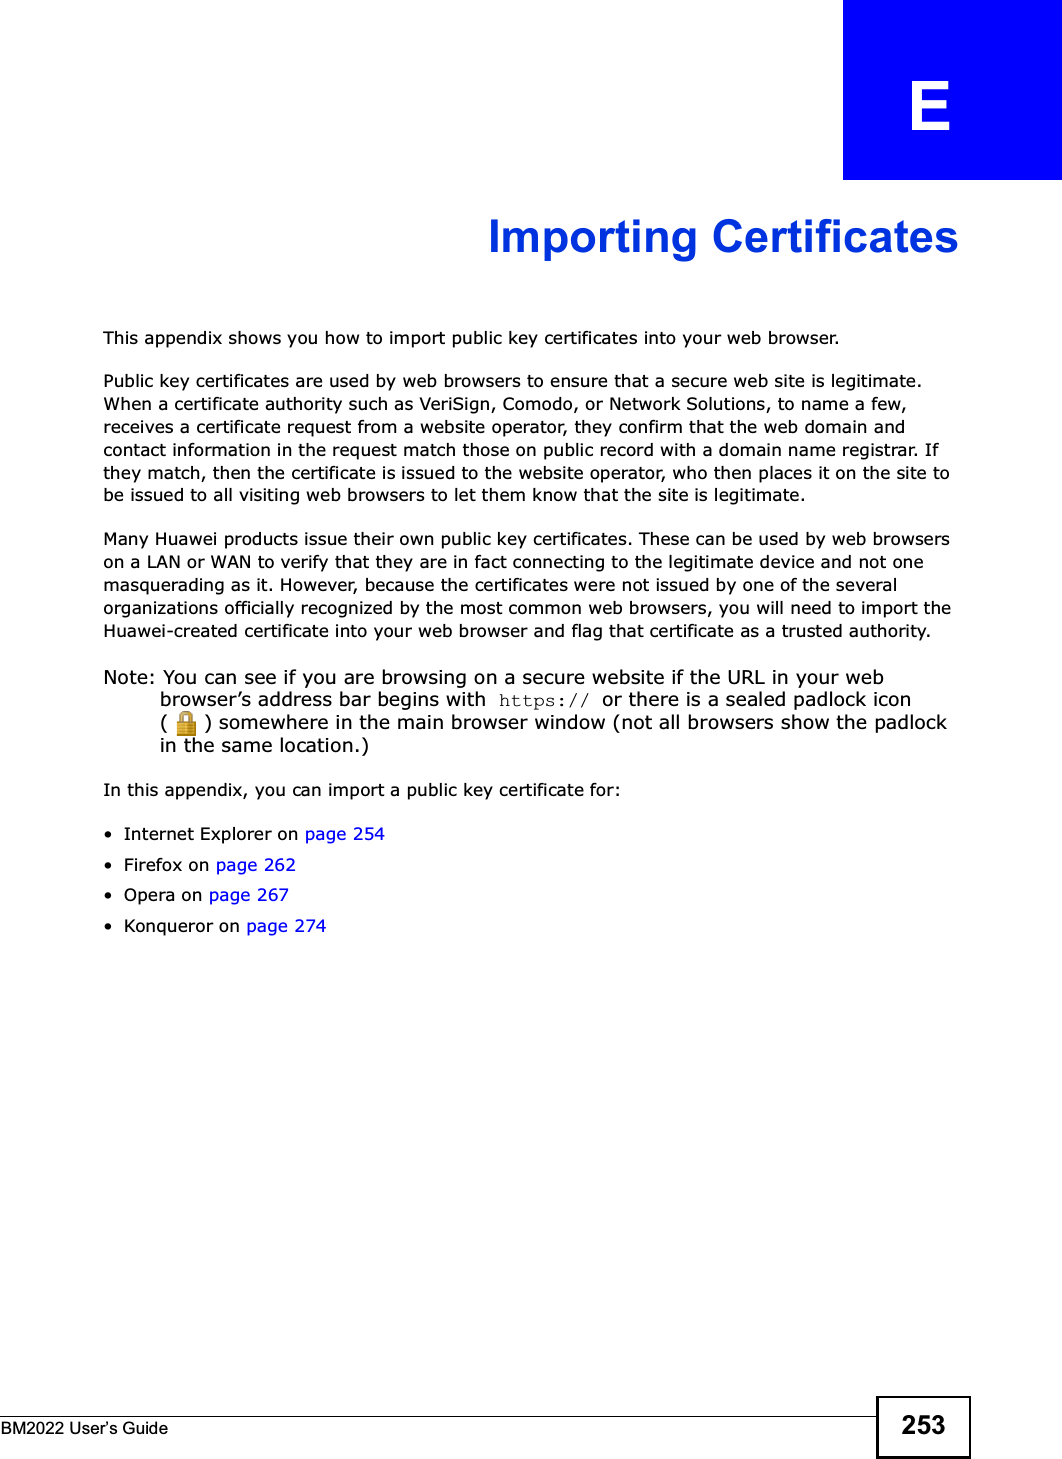 BM2022 Users Guide 253APPENDIX   EImporting CertificatesThis appendix shows you how to import public key certificates into your web browser. Public key certificates are used by web browsers to ensure that a secure web site is legitimate. When a certificate authority such as VeriSign, Comodo, or Network Solutions, to name a few, receives a certificate request from a website operator, they confirm that the web domain and contact information in the request match those on public record with a domain name registrar. If they match, then the certificate is issued to the website operator, who then places it on the site to be issued to all visiting web browsers to let them know that the site is legitimate.Many Huawei products issue their own public key certificates. These can be used by web browsers on a LAN or WAN to verify that they are in fact connecting to the legitimate device and not one masquerading as it. However, because the certificates were not issued by one of the several organizations officially recognized by the most common web browsers, you will need to import the Huawei-created certificate into your web browser and flag that certificate as a trusted authority.Note: You can see if you are browsing on a secure website if the URL in your web browsers address bar begins with  https:// or there is a sealed padlock icon ( ) somewhere in the main browser window (not all browsers show the padlock in the same location.)In this appendix, you can import a public key certificate for: Internet Explorer on page 254 Firefox on page 262Opera on page 267 Konqueror on page 274